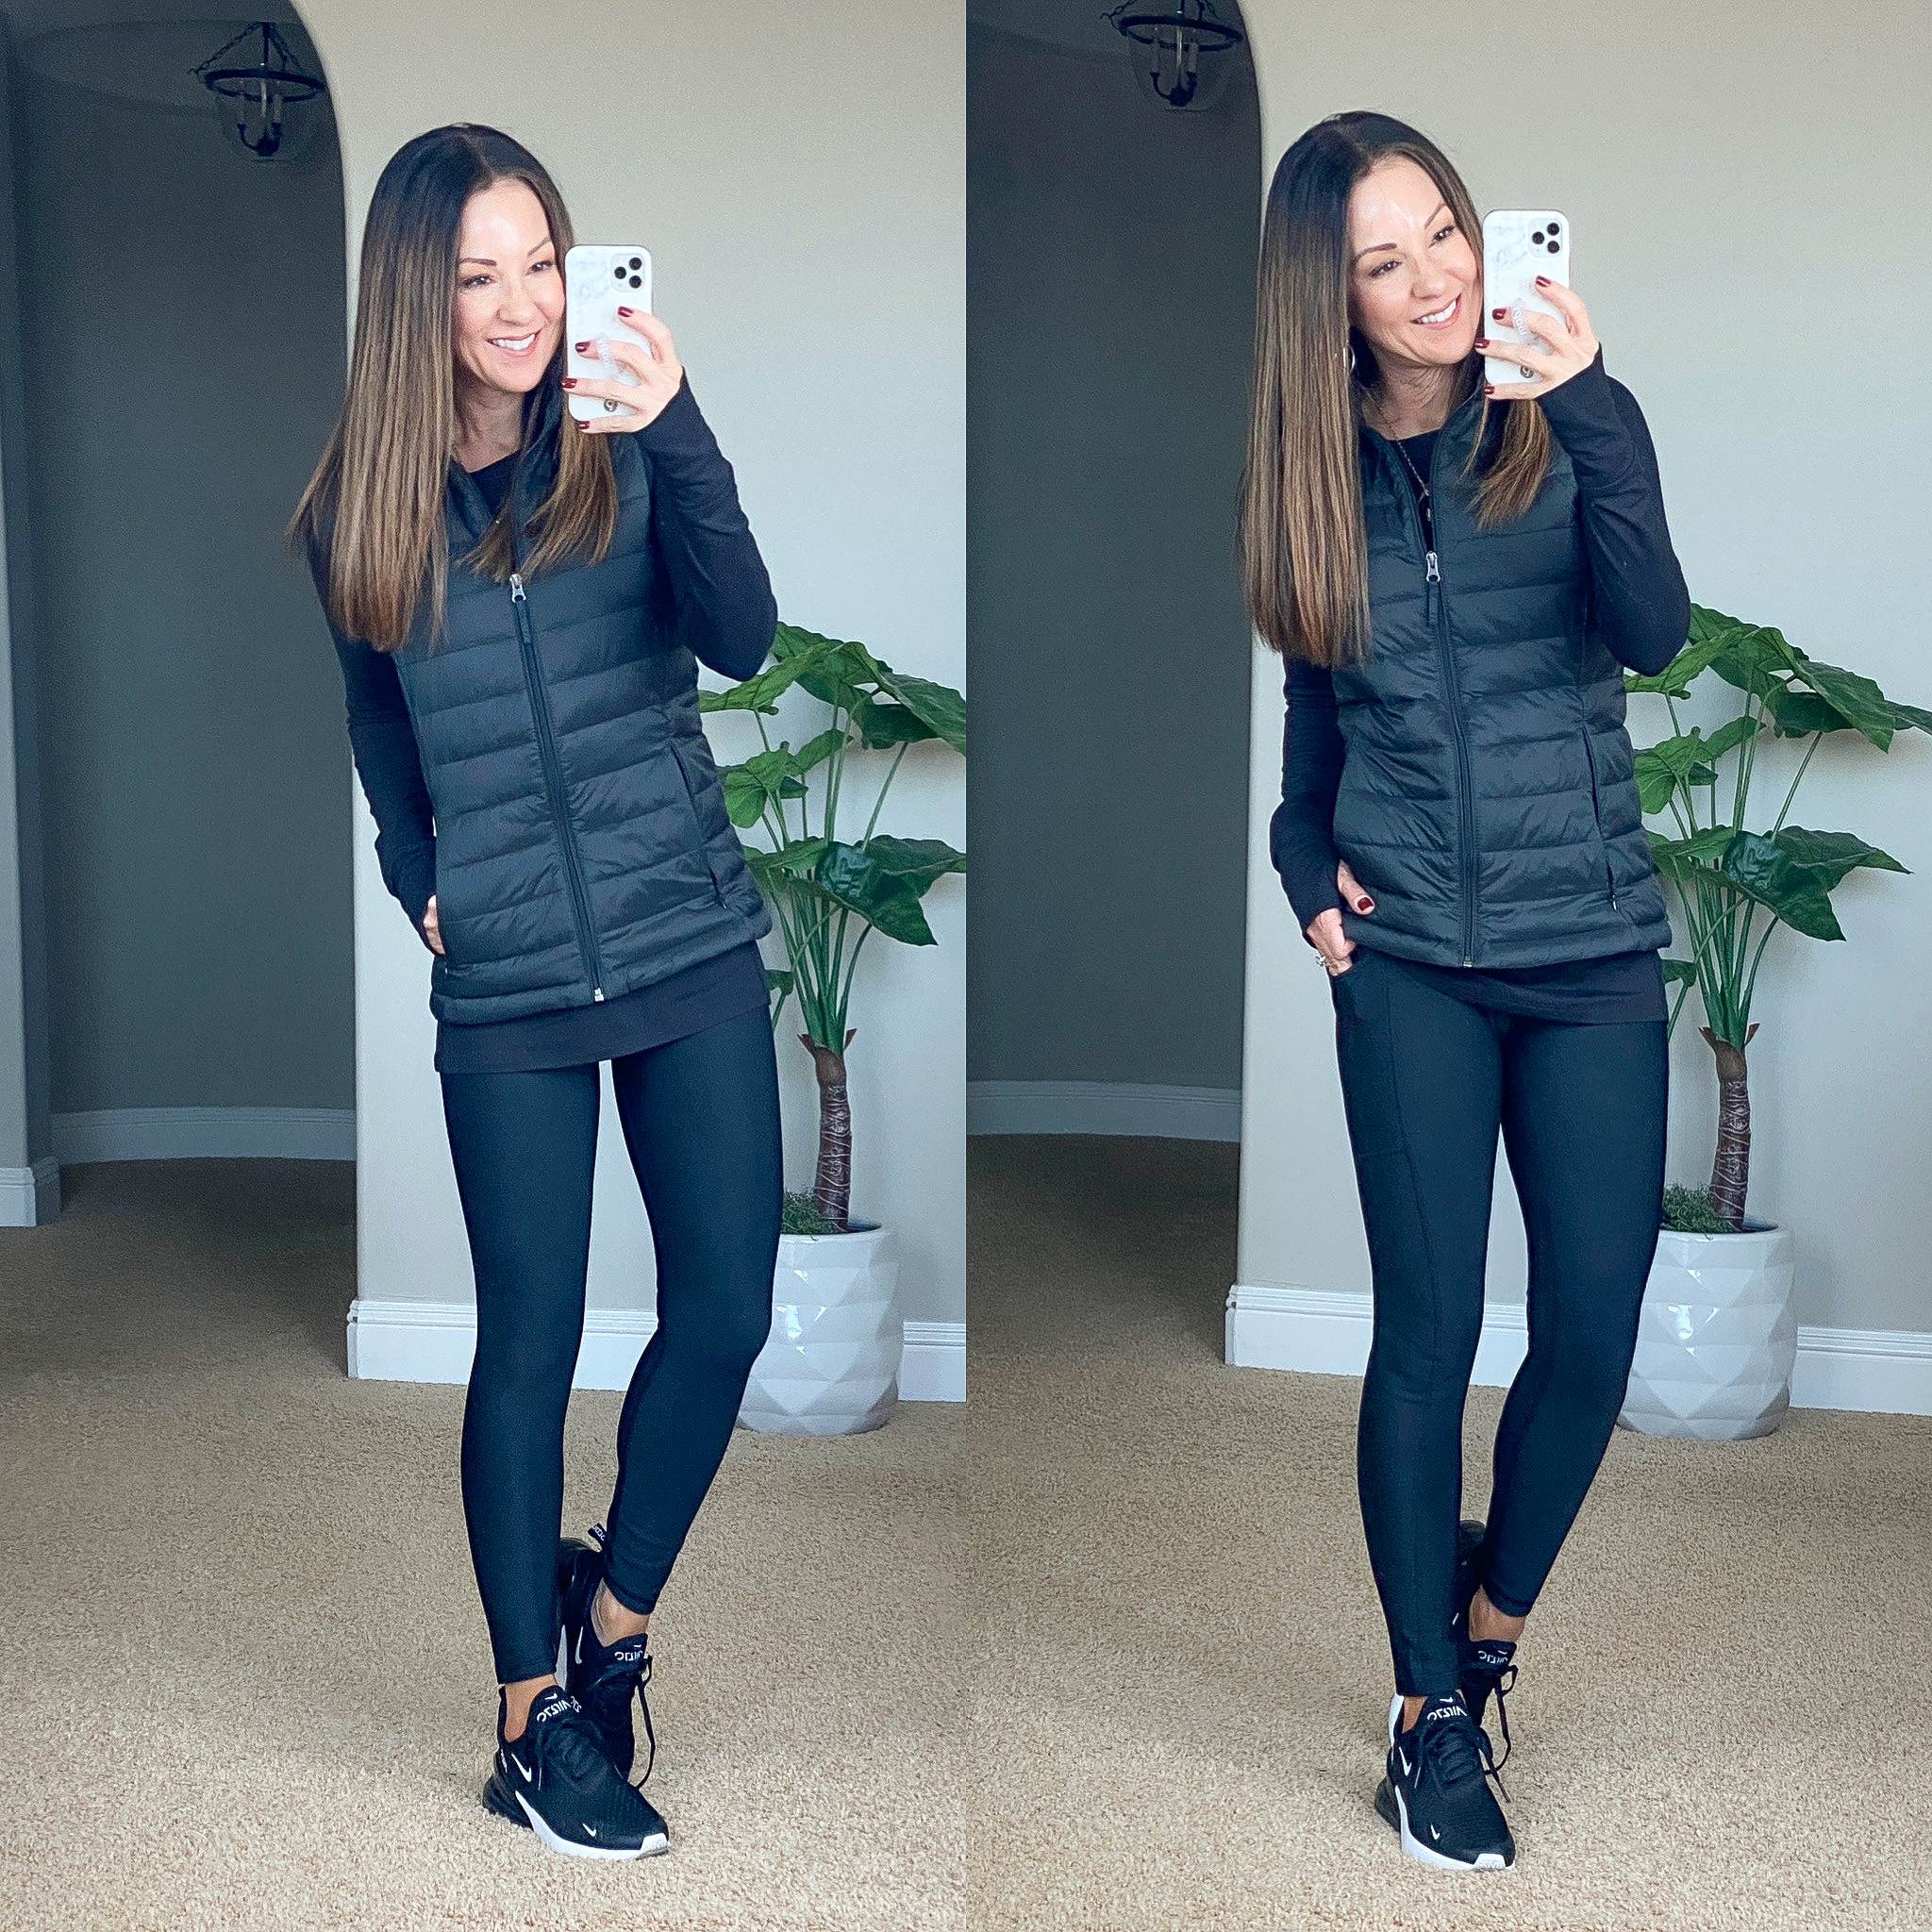 black workout long sleeve top, black puffer vest, leggings with pockets, leggings without pockets, black sneakers, top 10 fashion, november top 10 